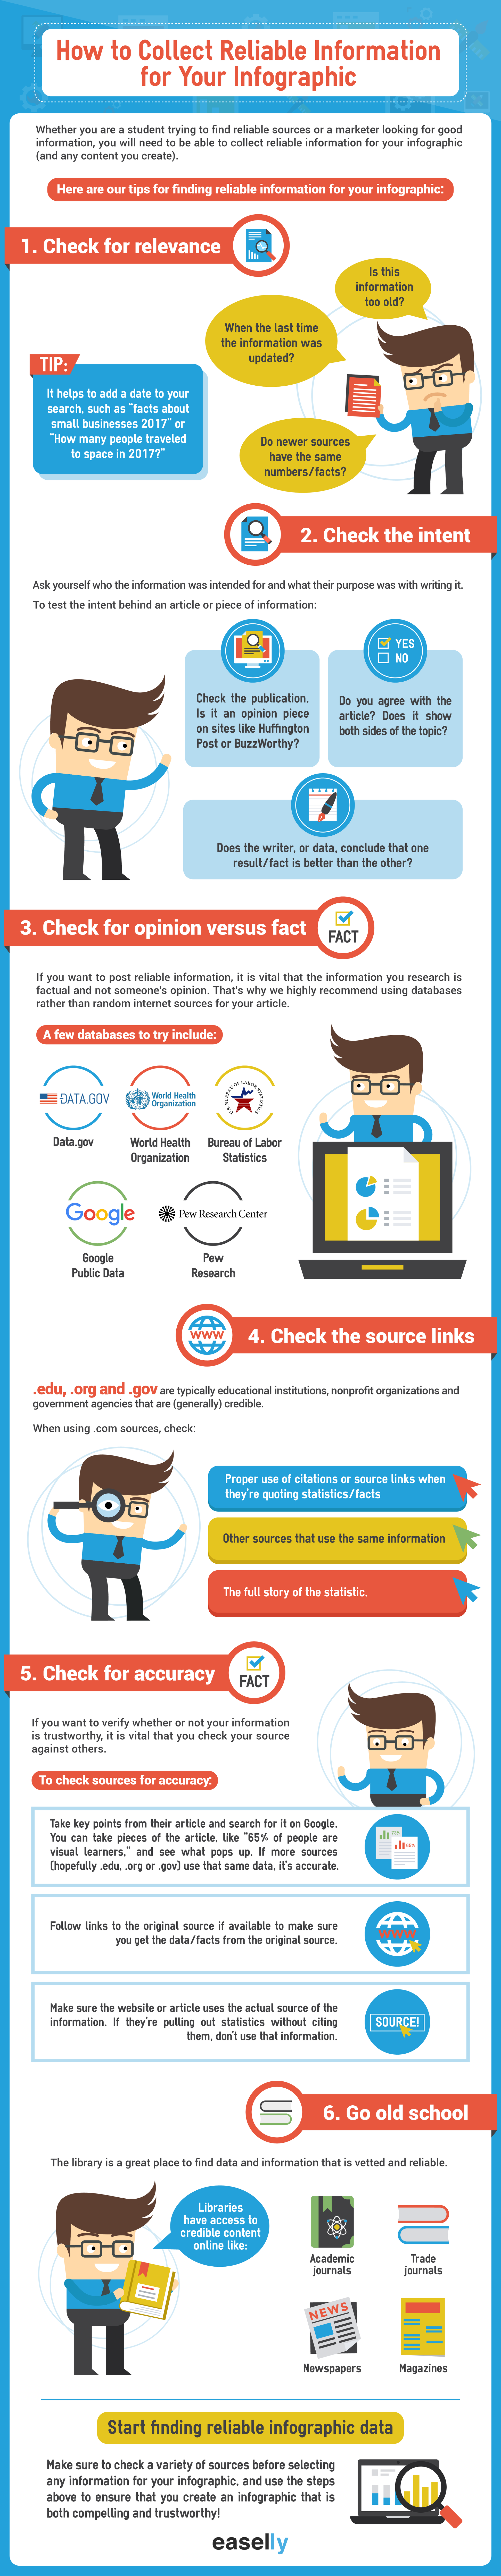 how-to-collect-reliable-information-infographic